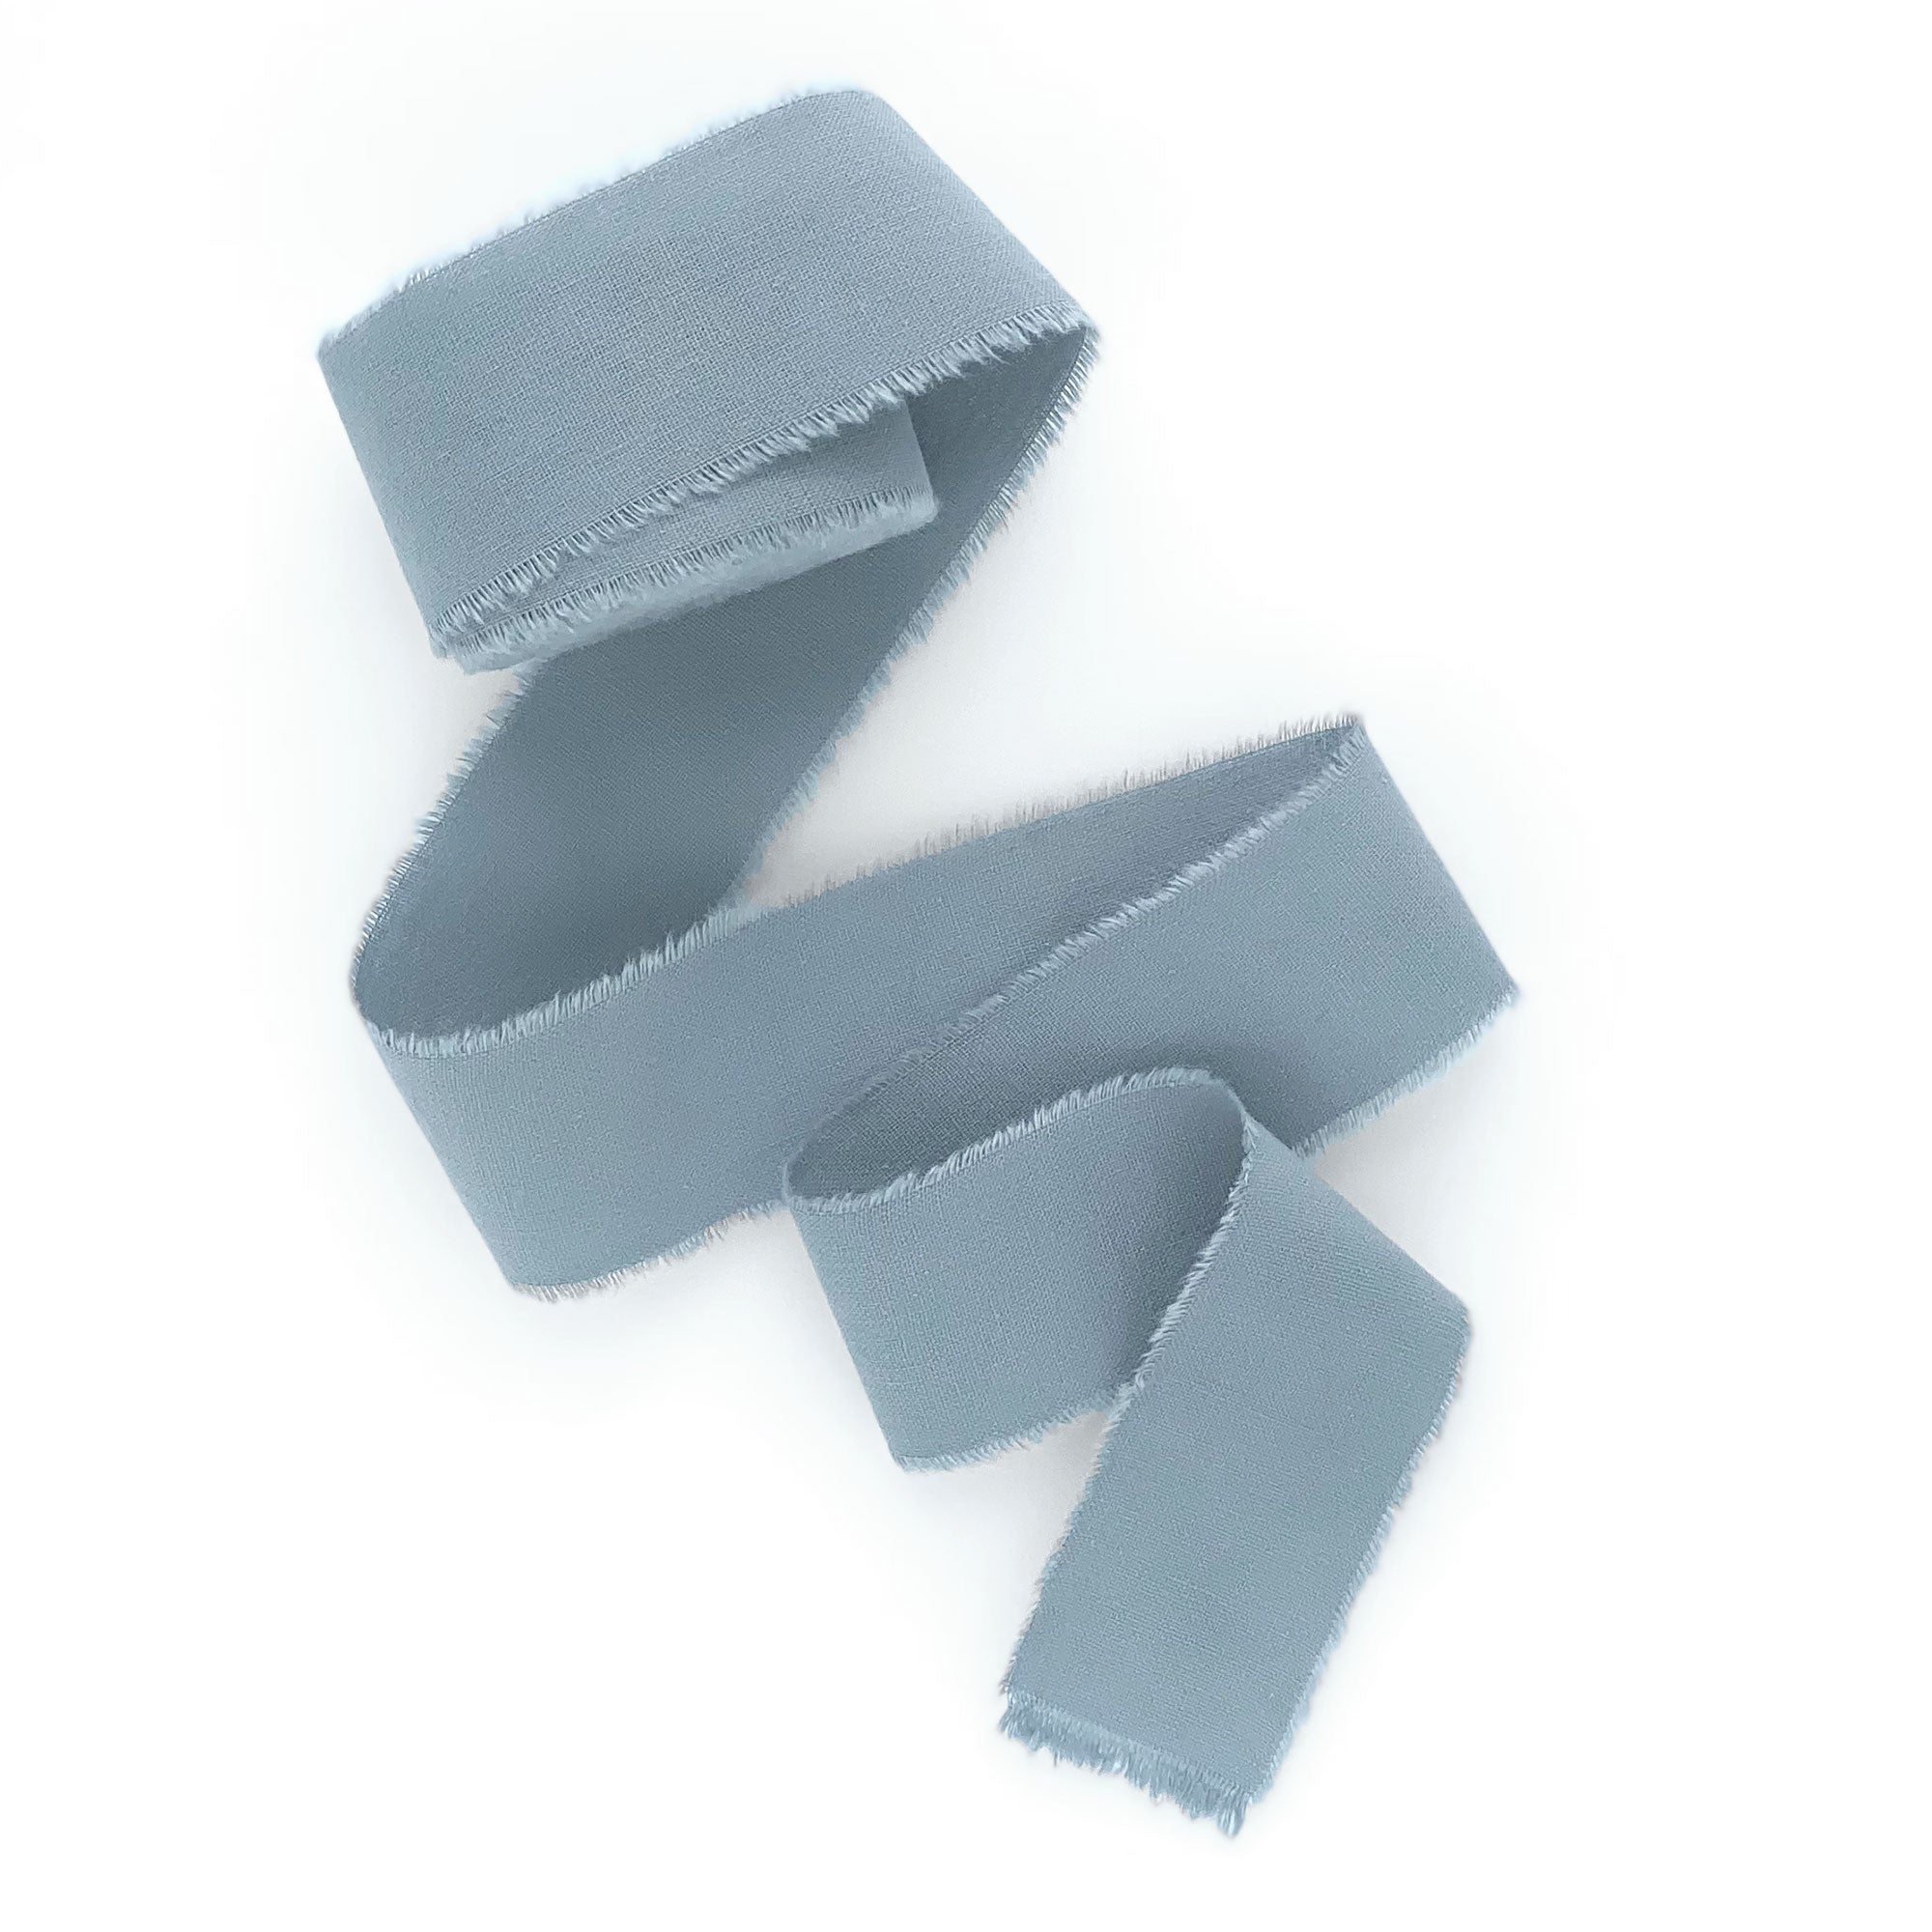 Dusty blue hand dyed silk ribbon with frayed edges 1 inch wide